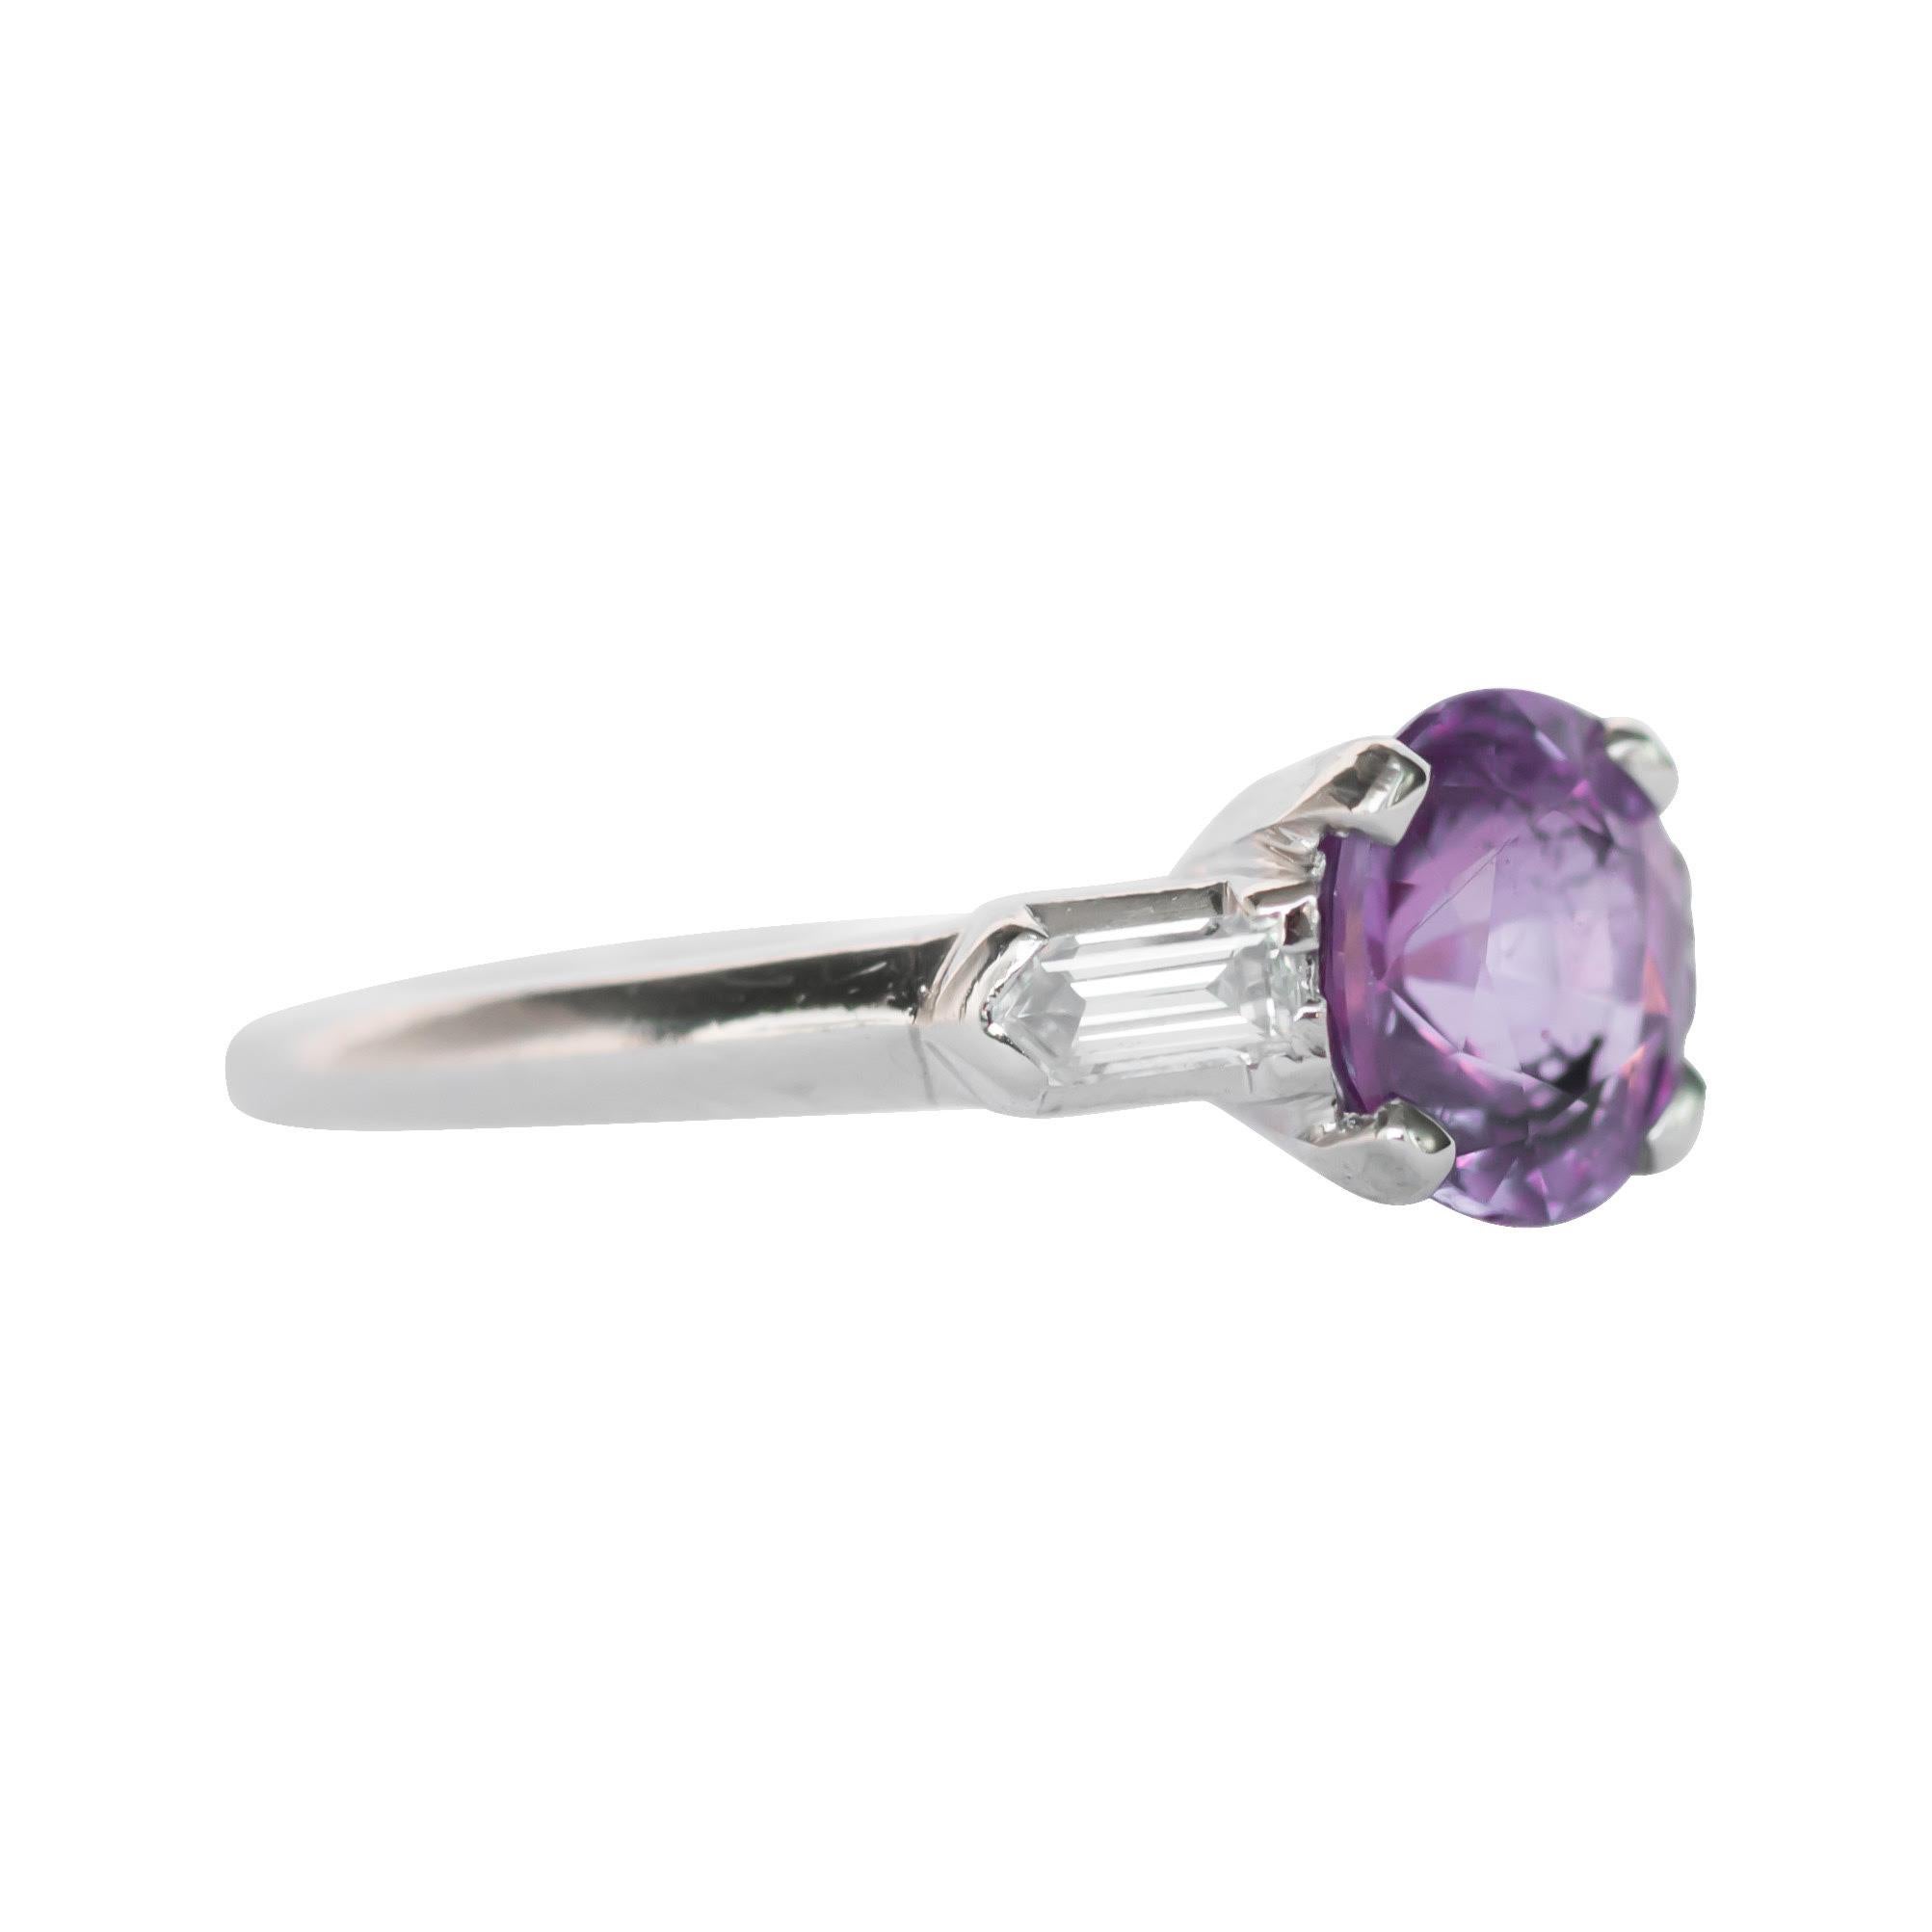 Ring Size: 5.25
Metal Type: Platinum
Weight: 2.7 grams

Center Color Stone Diamond Details
GIA CERTIFIED Center Diamond - Certificate # 2195496098
Shape: Brilliant and Step Cut 
Carat Weight: 1.20 carat
Color: Purple-Pink


Side Stone Details: